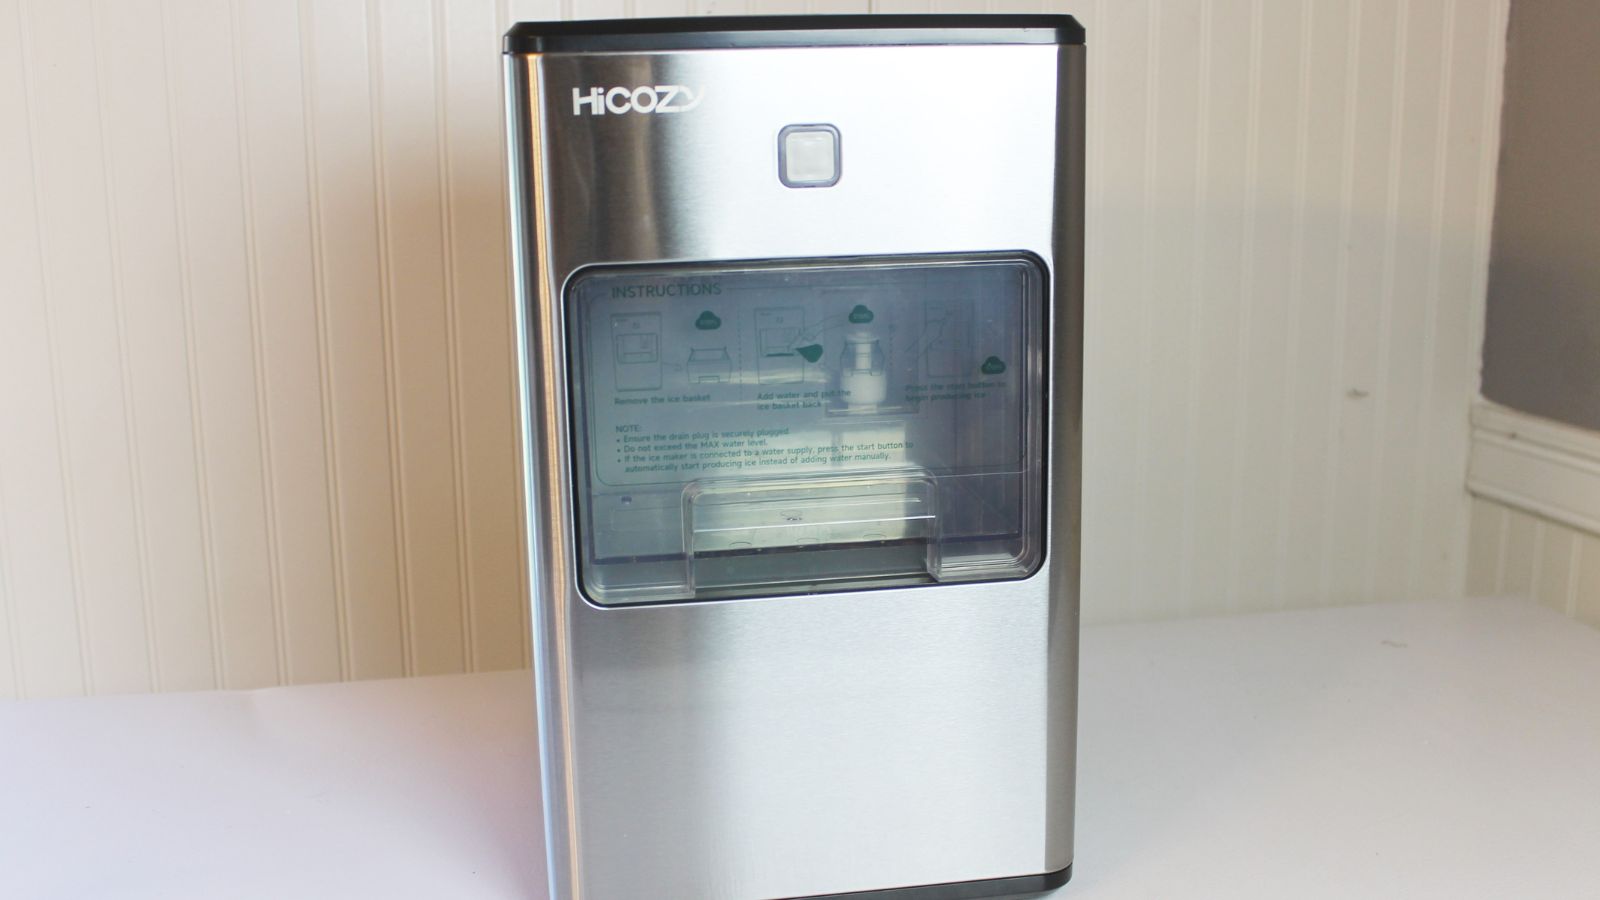  HiCOZY Dual-Mode Nugget Ice Maker Countertop, Compact Crushed  Ice Maker, Produce Ice in 5 Mins, 55LB Per Day, Self-Cleaning and Automatic  Water Refill (Black) : Appliances